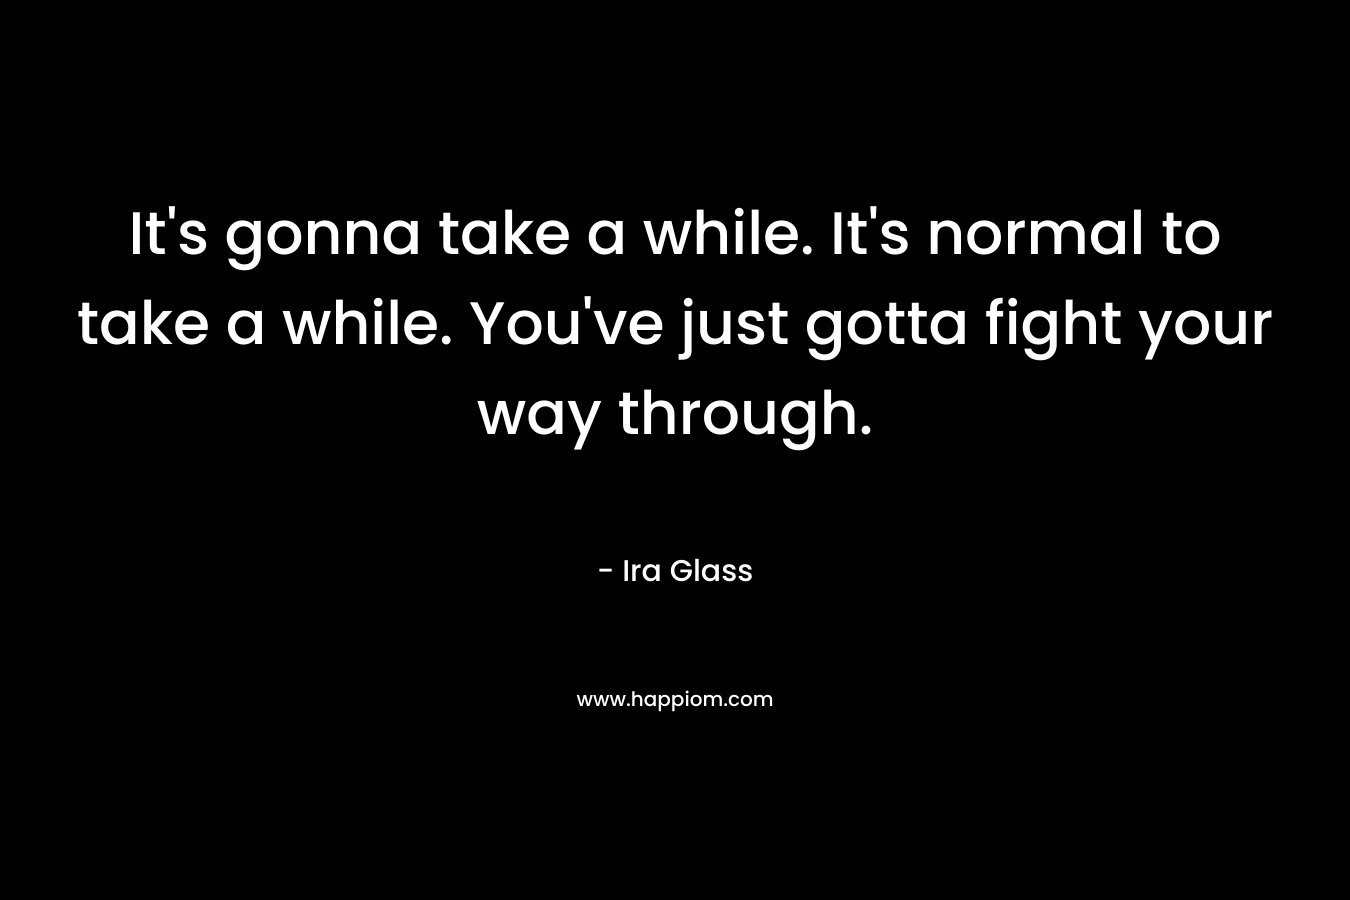 It’s gonna take a while. It’s normal to take a while. You’ve just gotta fight your way through. – Ira Glass